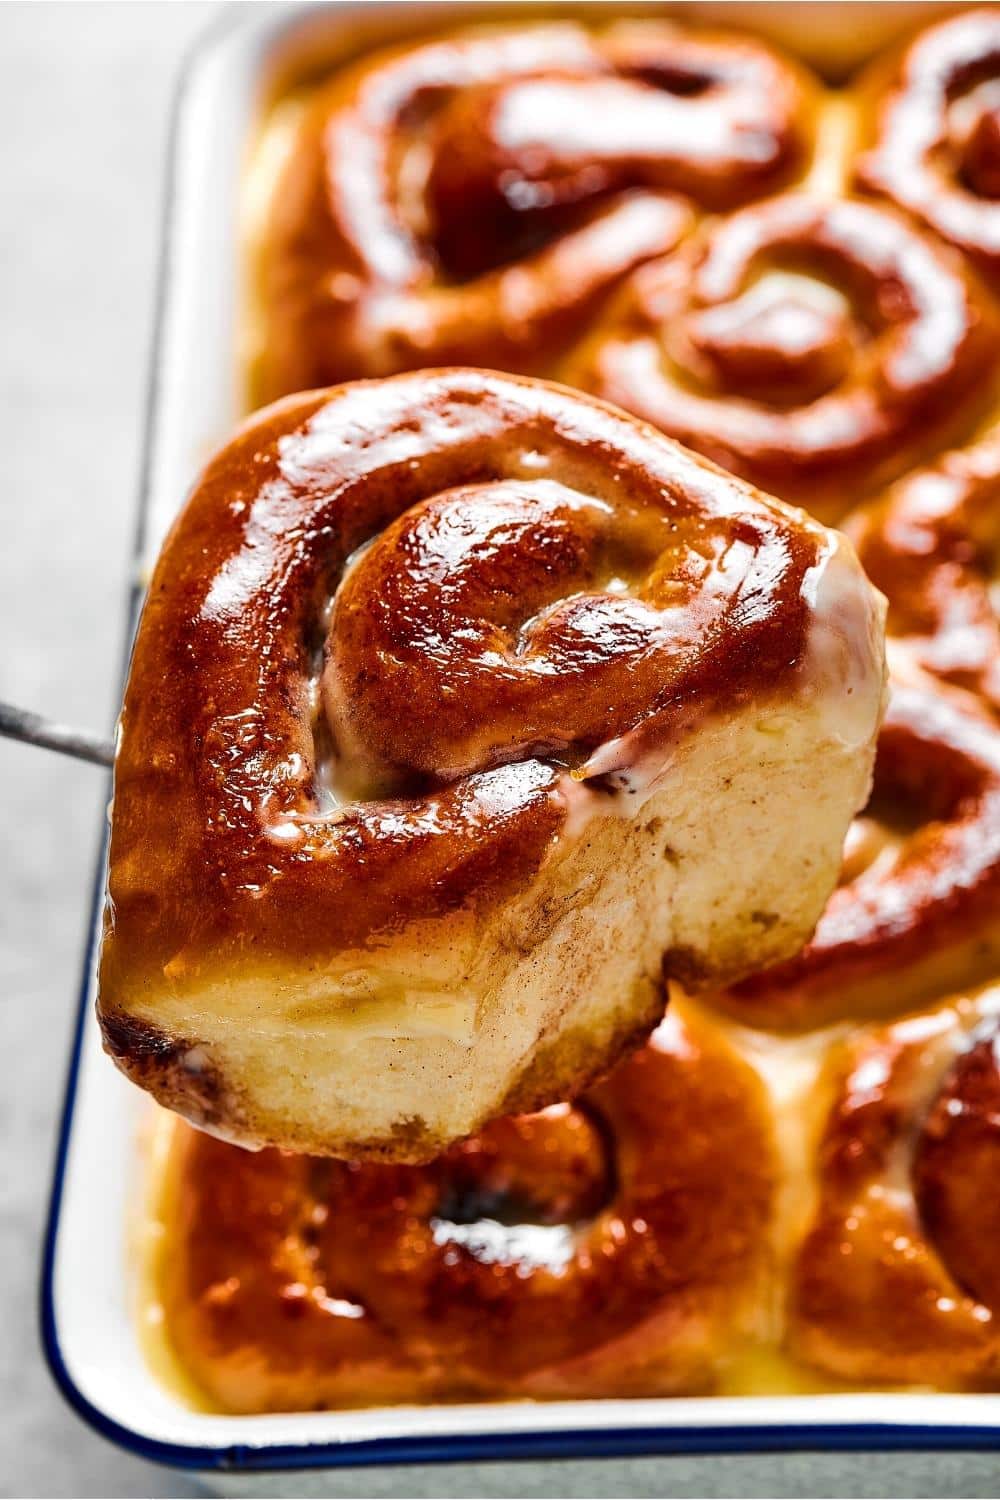 A cinnamon roll being held by utensil in front of a baking dish filled with the cinnamon rolls.